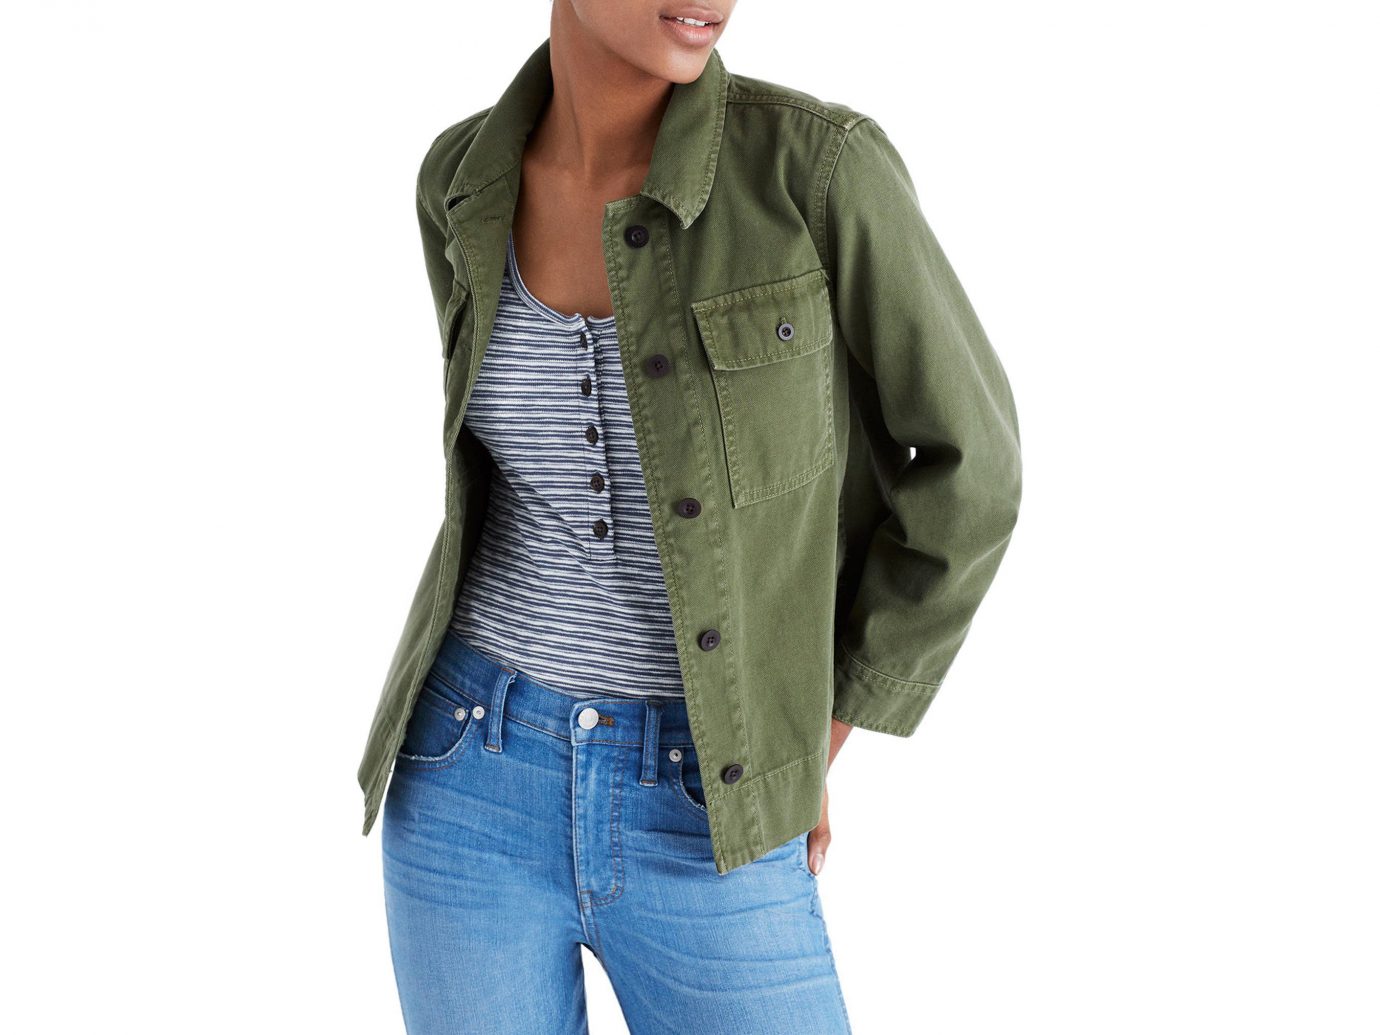 Style + Design person jacket wearing smiling posing green sleeve product jeans